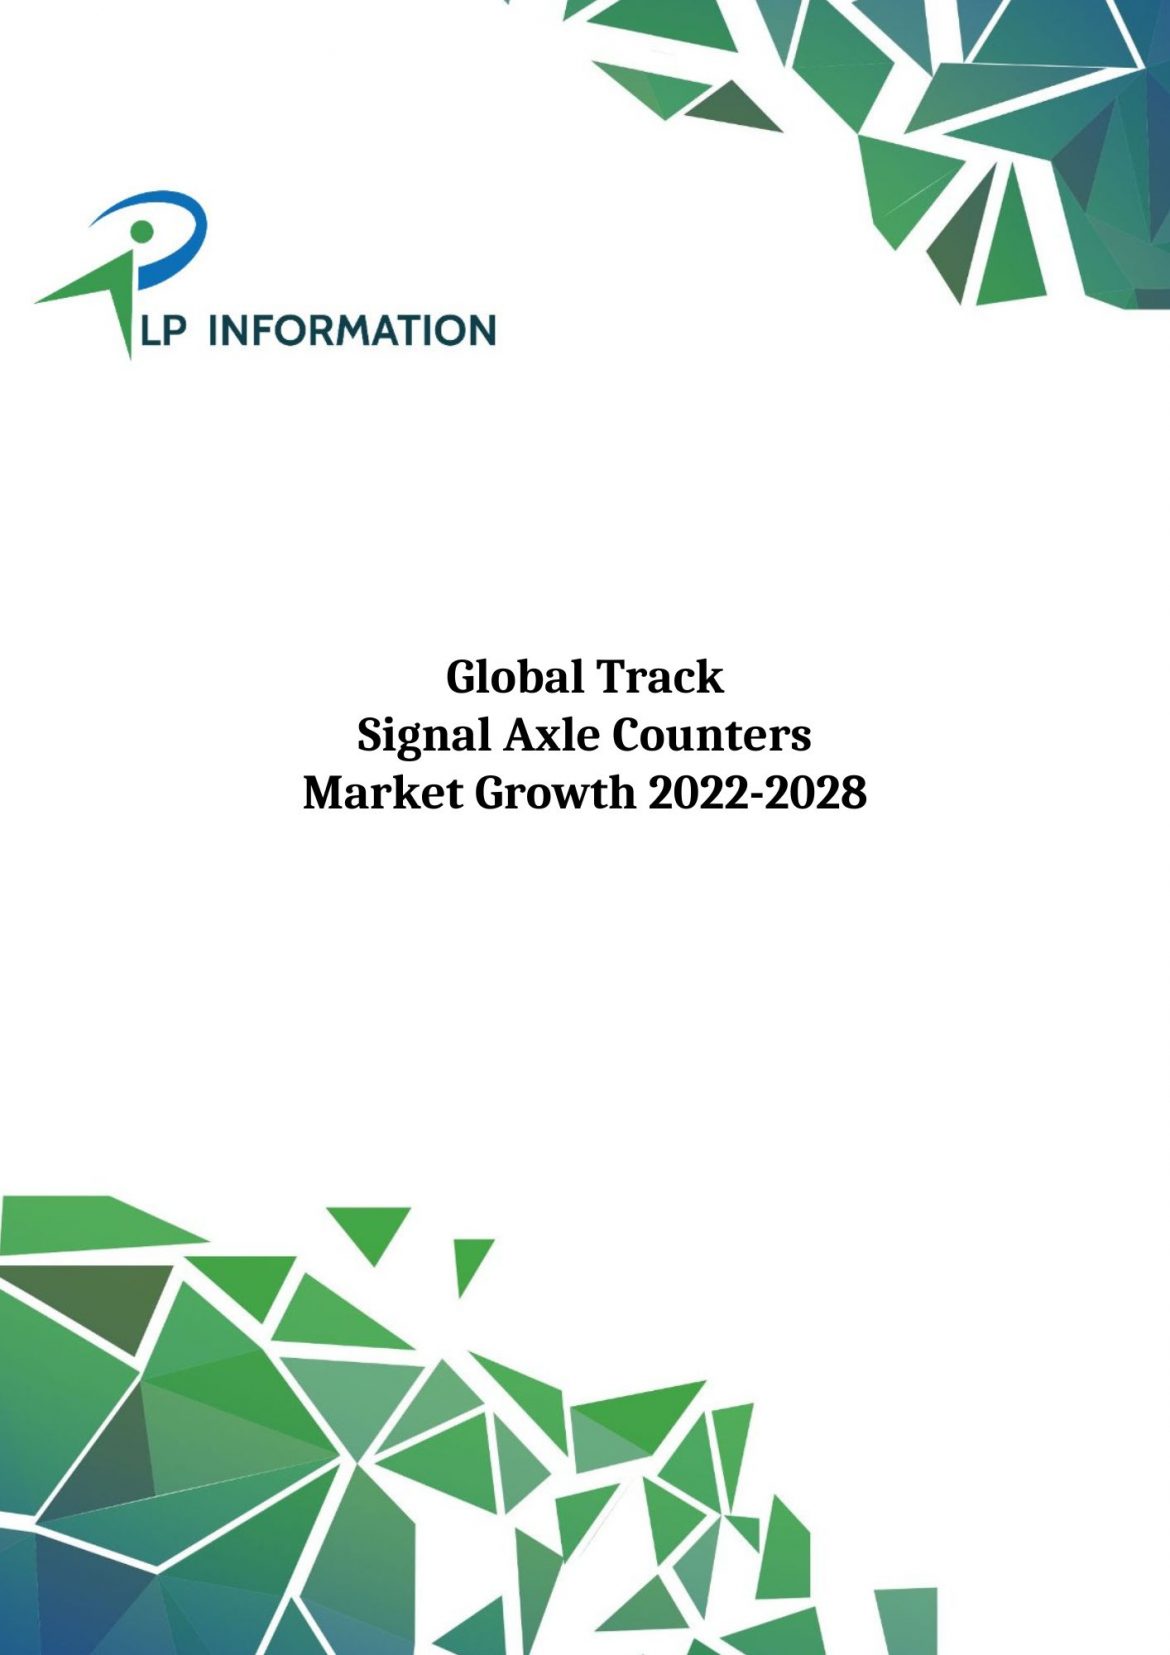 Global Track Signal Axle Counters Market Growth 2022-2028